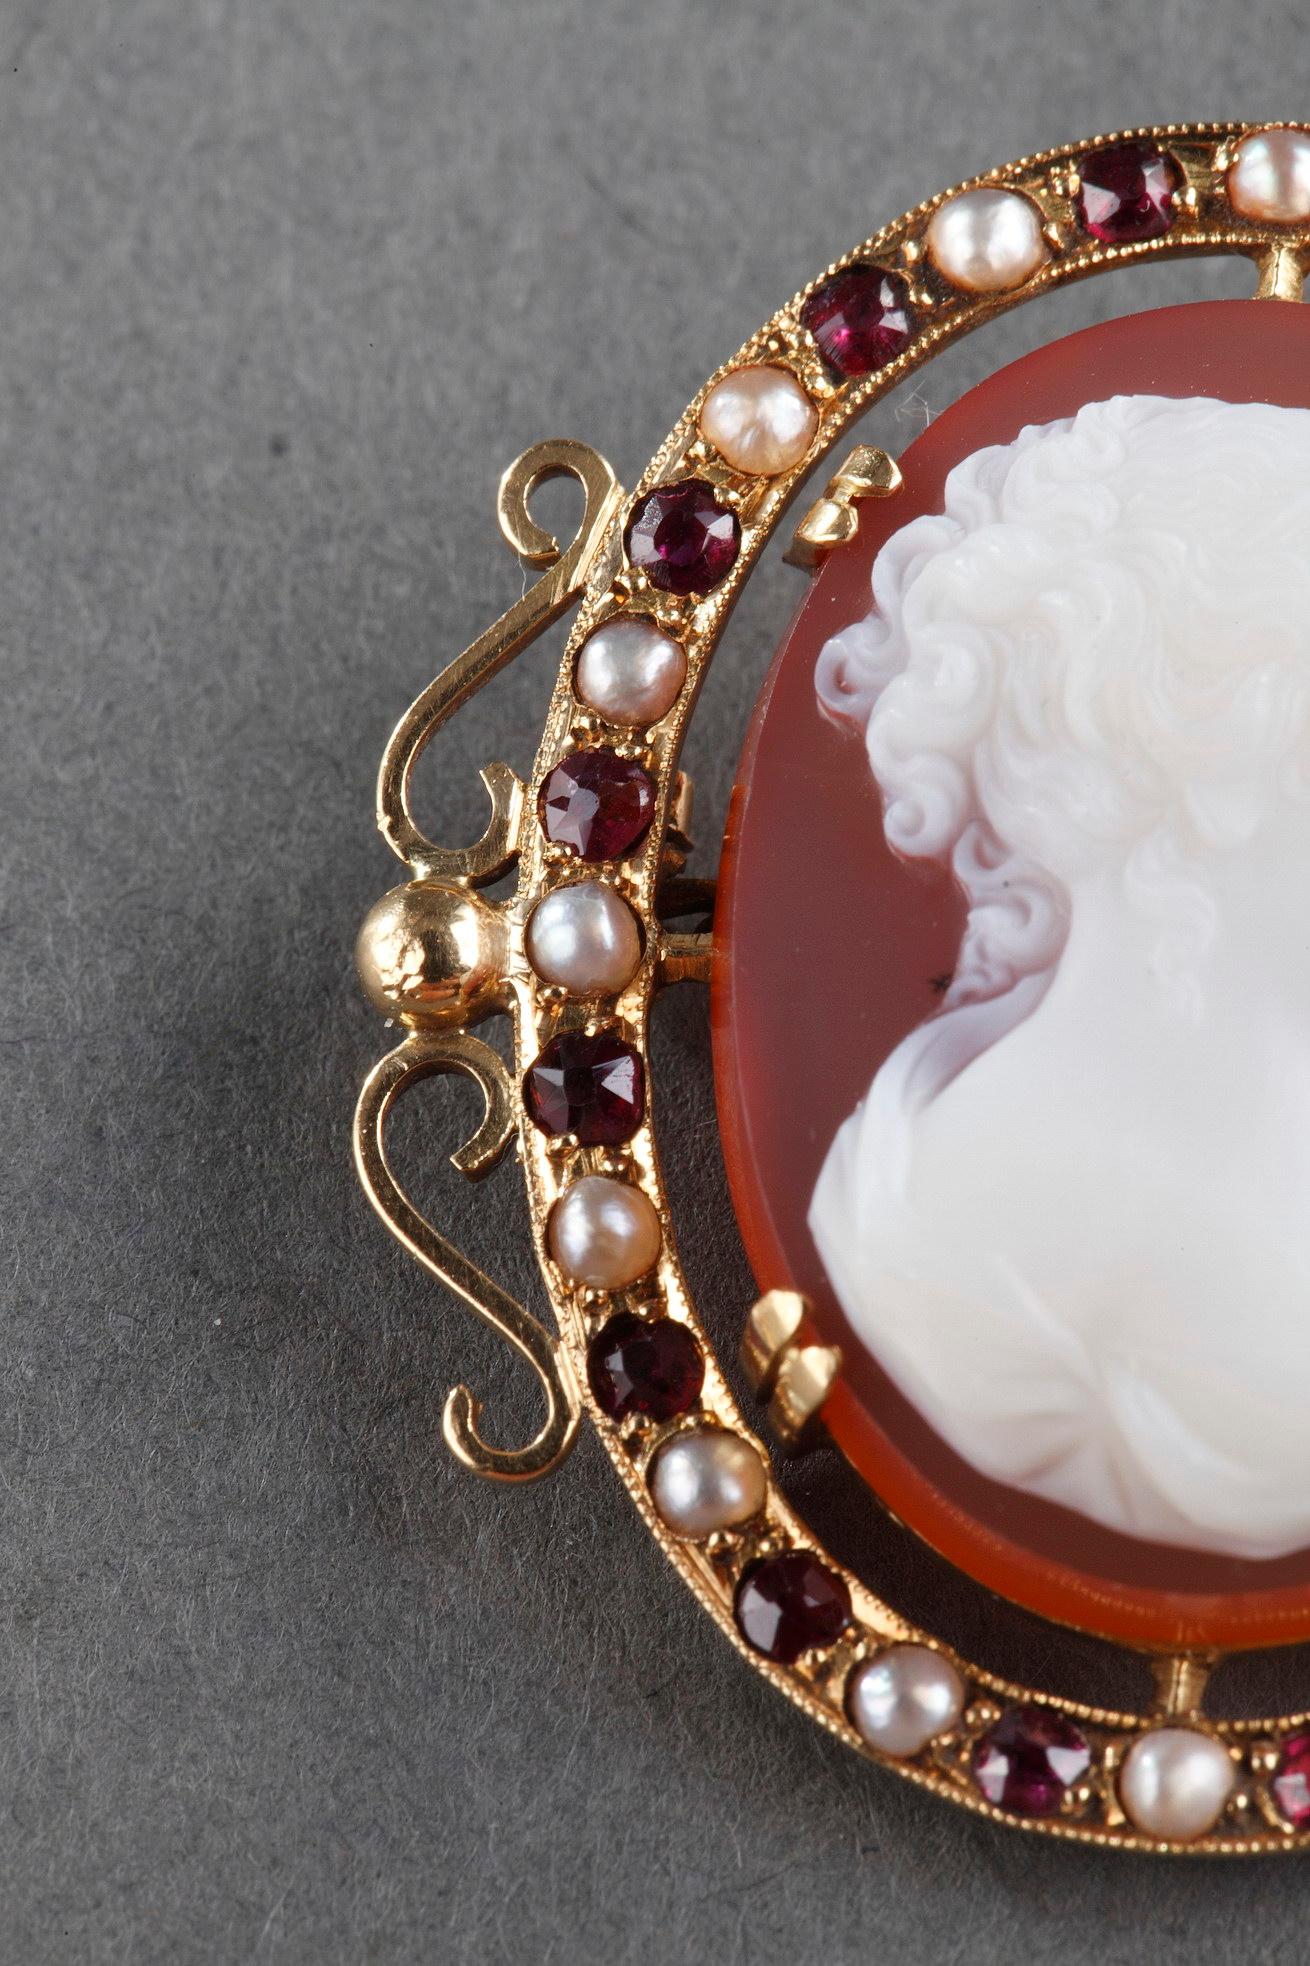 Gold Brooch with Agate Cameo and Pearls, Mid-19th Century For Sale 3